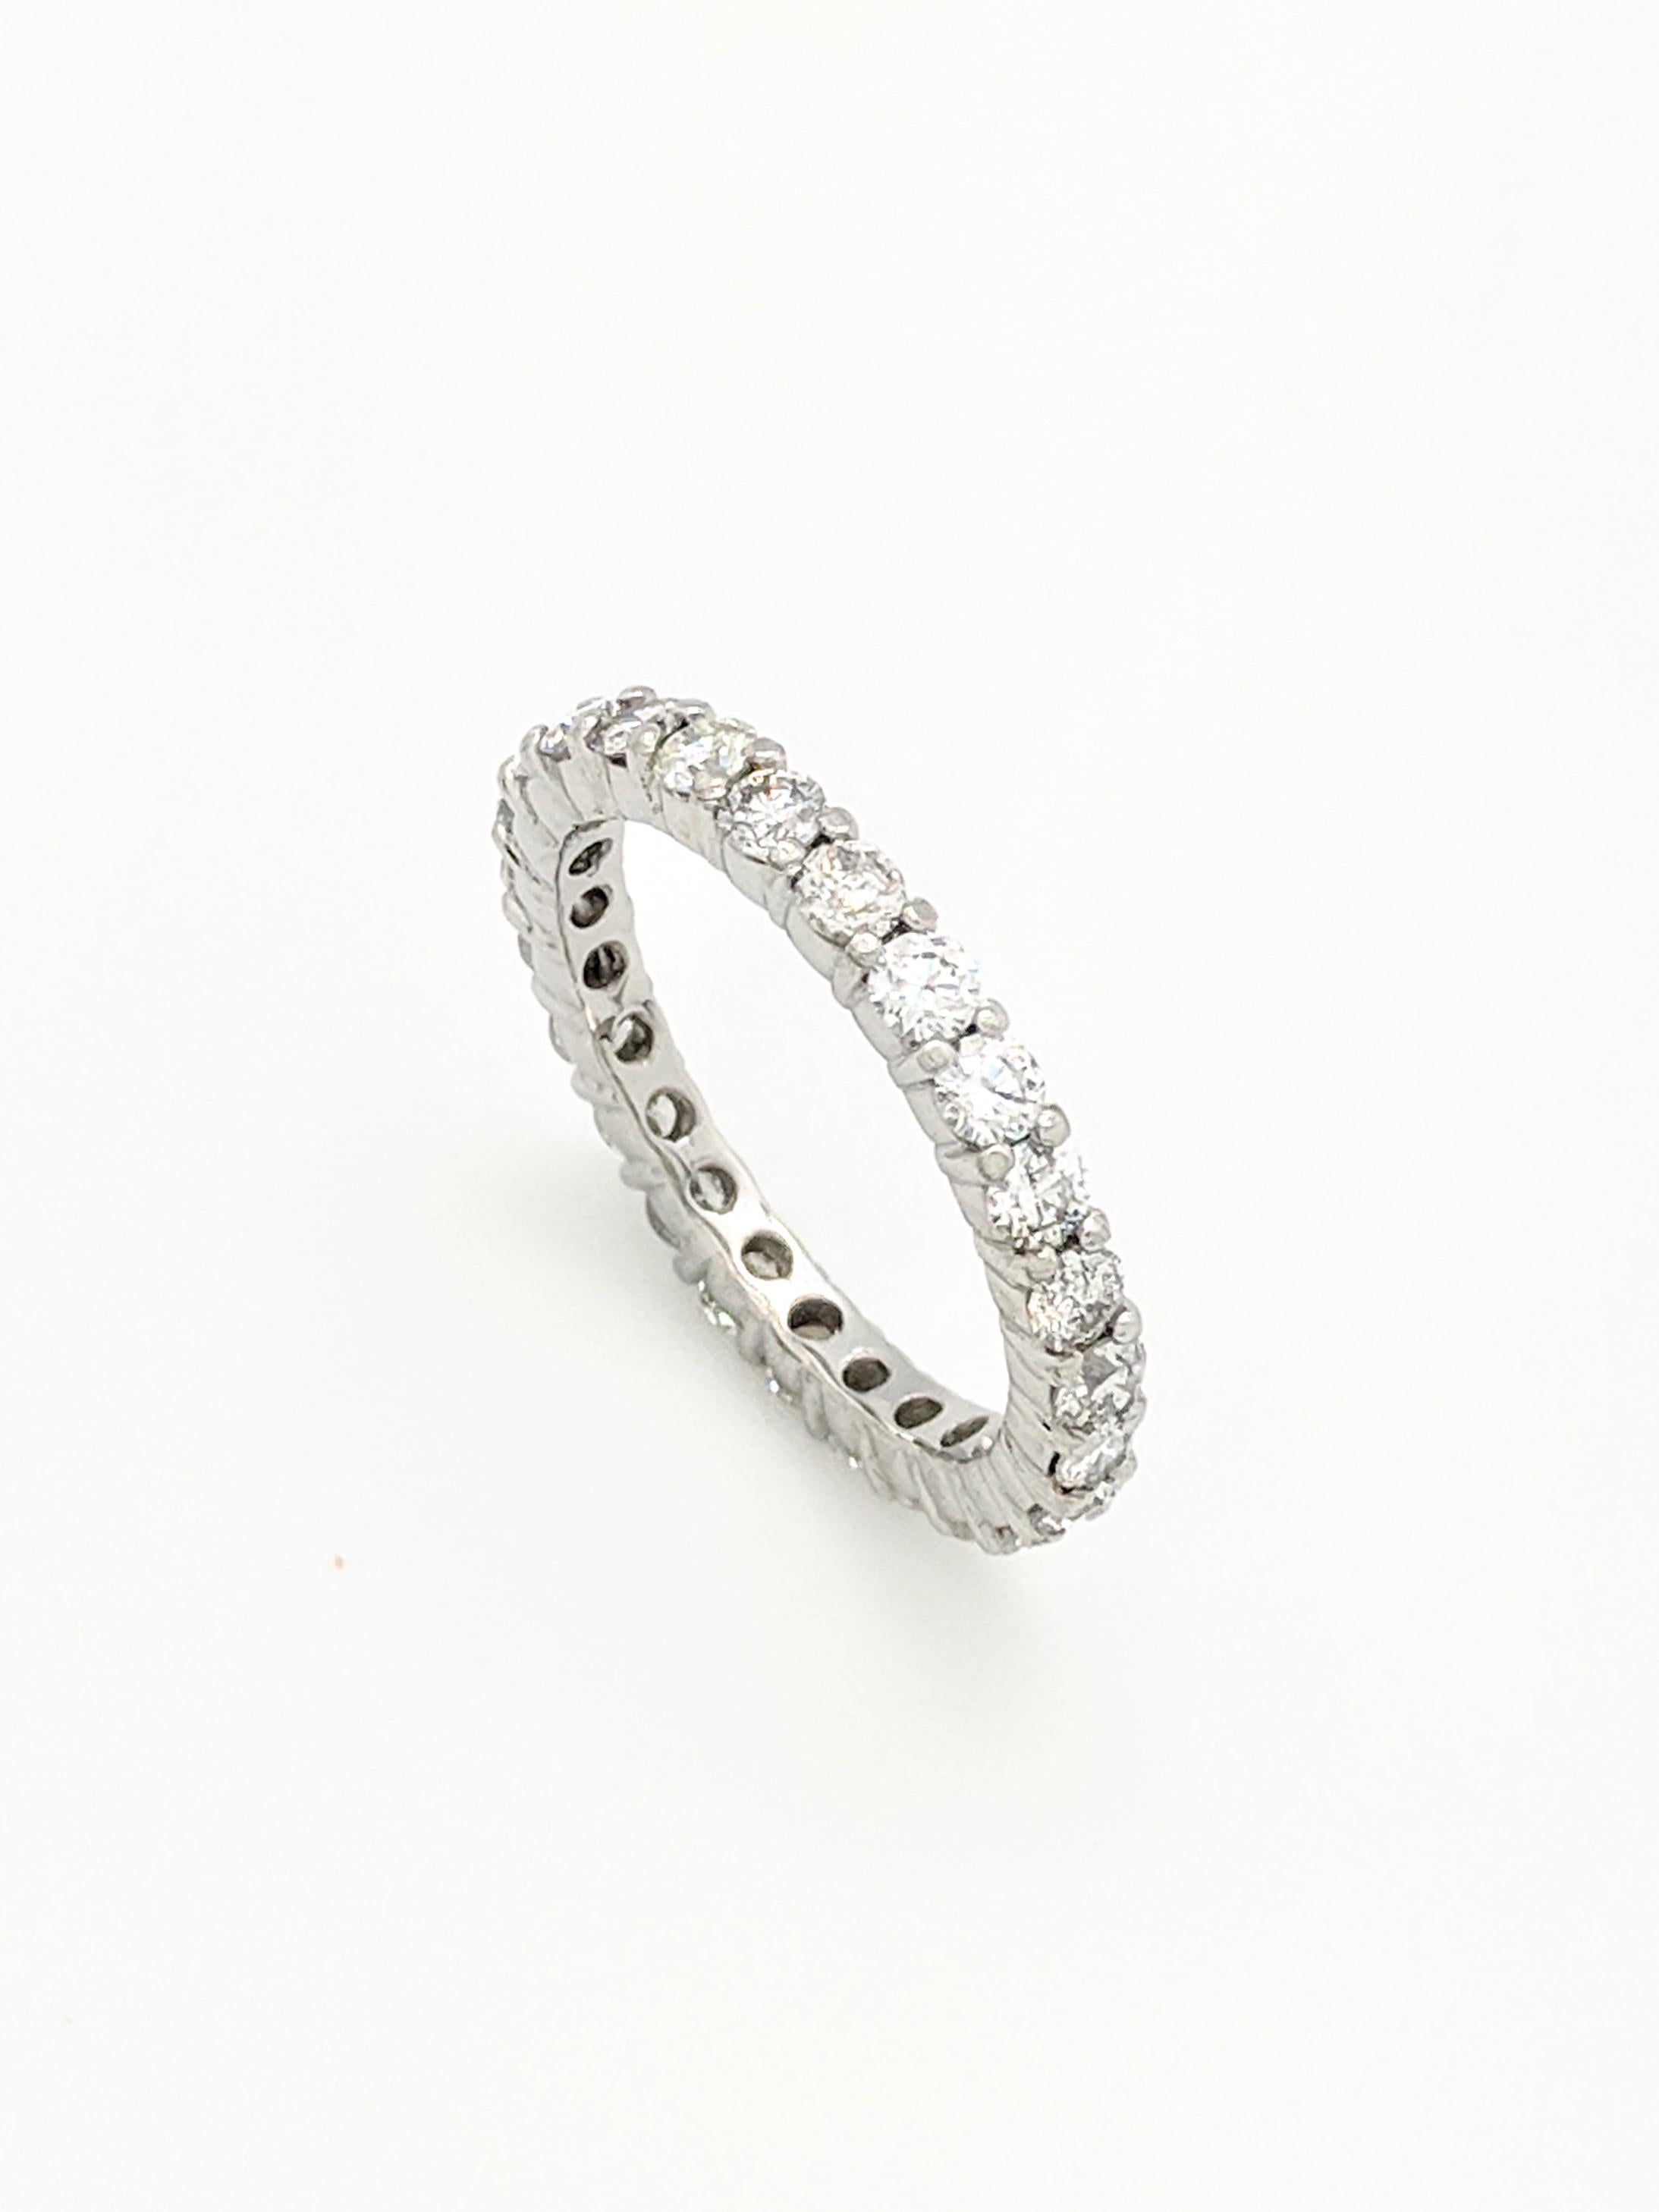 You are viewing a Stunning Diamond Eternity Band. This ring is crafted from platinum and features (25) natural round diamonds for an estimated 1.50ctw. We estimate the diamonds to be SI1 in clarity and G in color. This ring weighs 4.5 grams, is